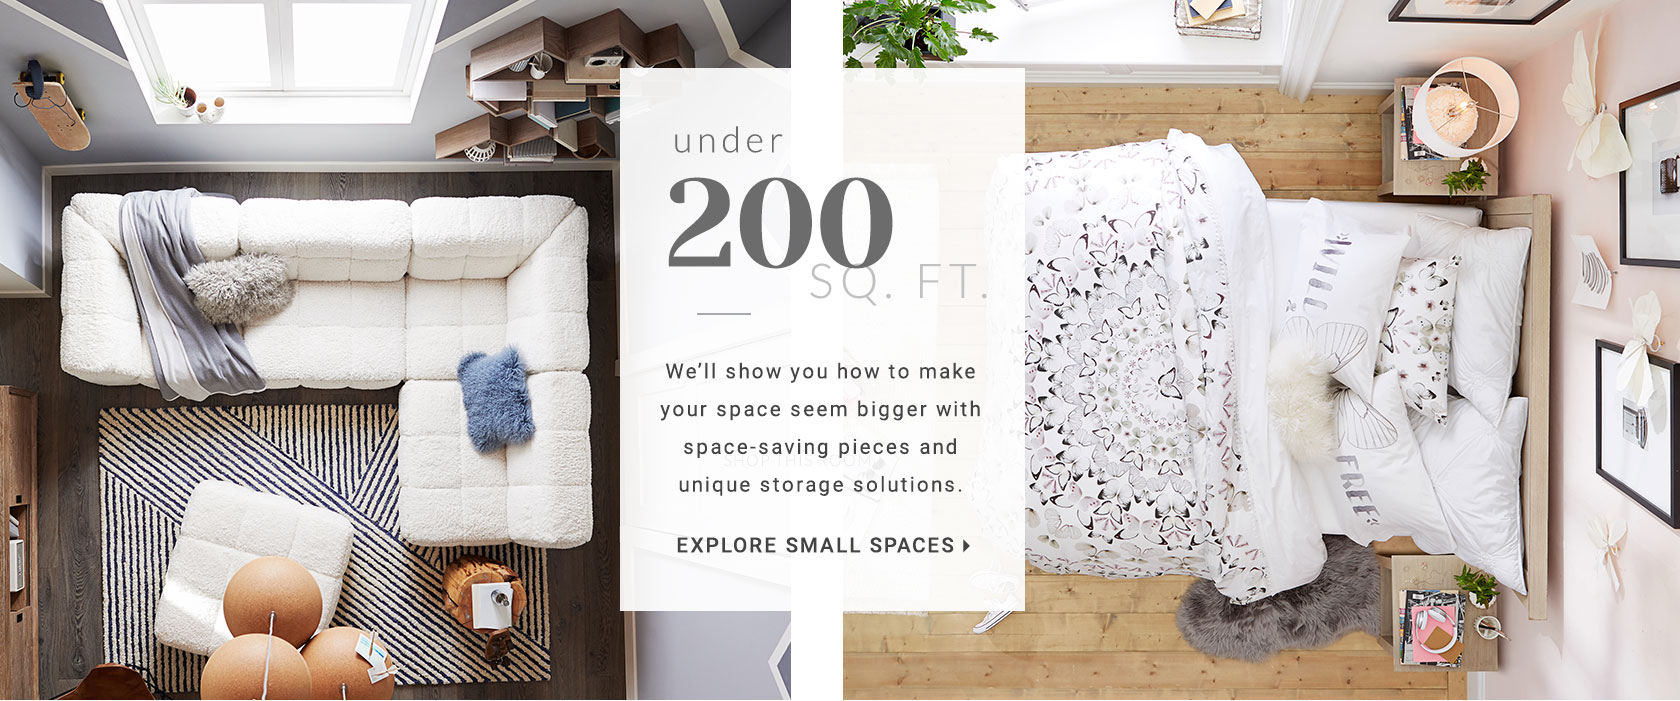 Small spaces are no match for us - give us a room under 200 square feet and we'll show you how to make it seem bigger with space-saving pieces and unique storage solutions. Small is the new big, after all.